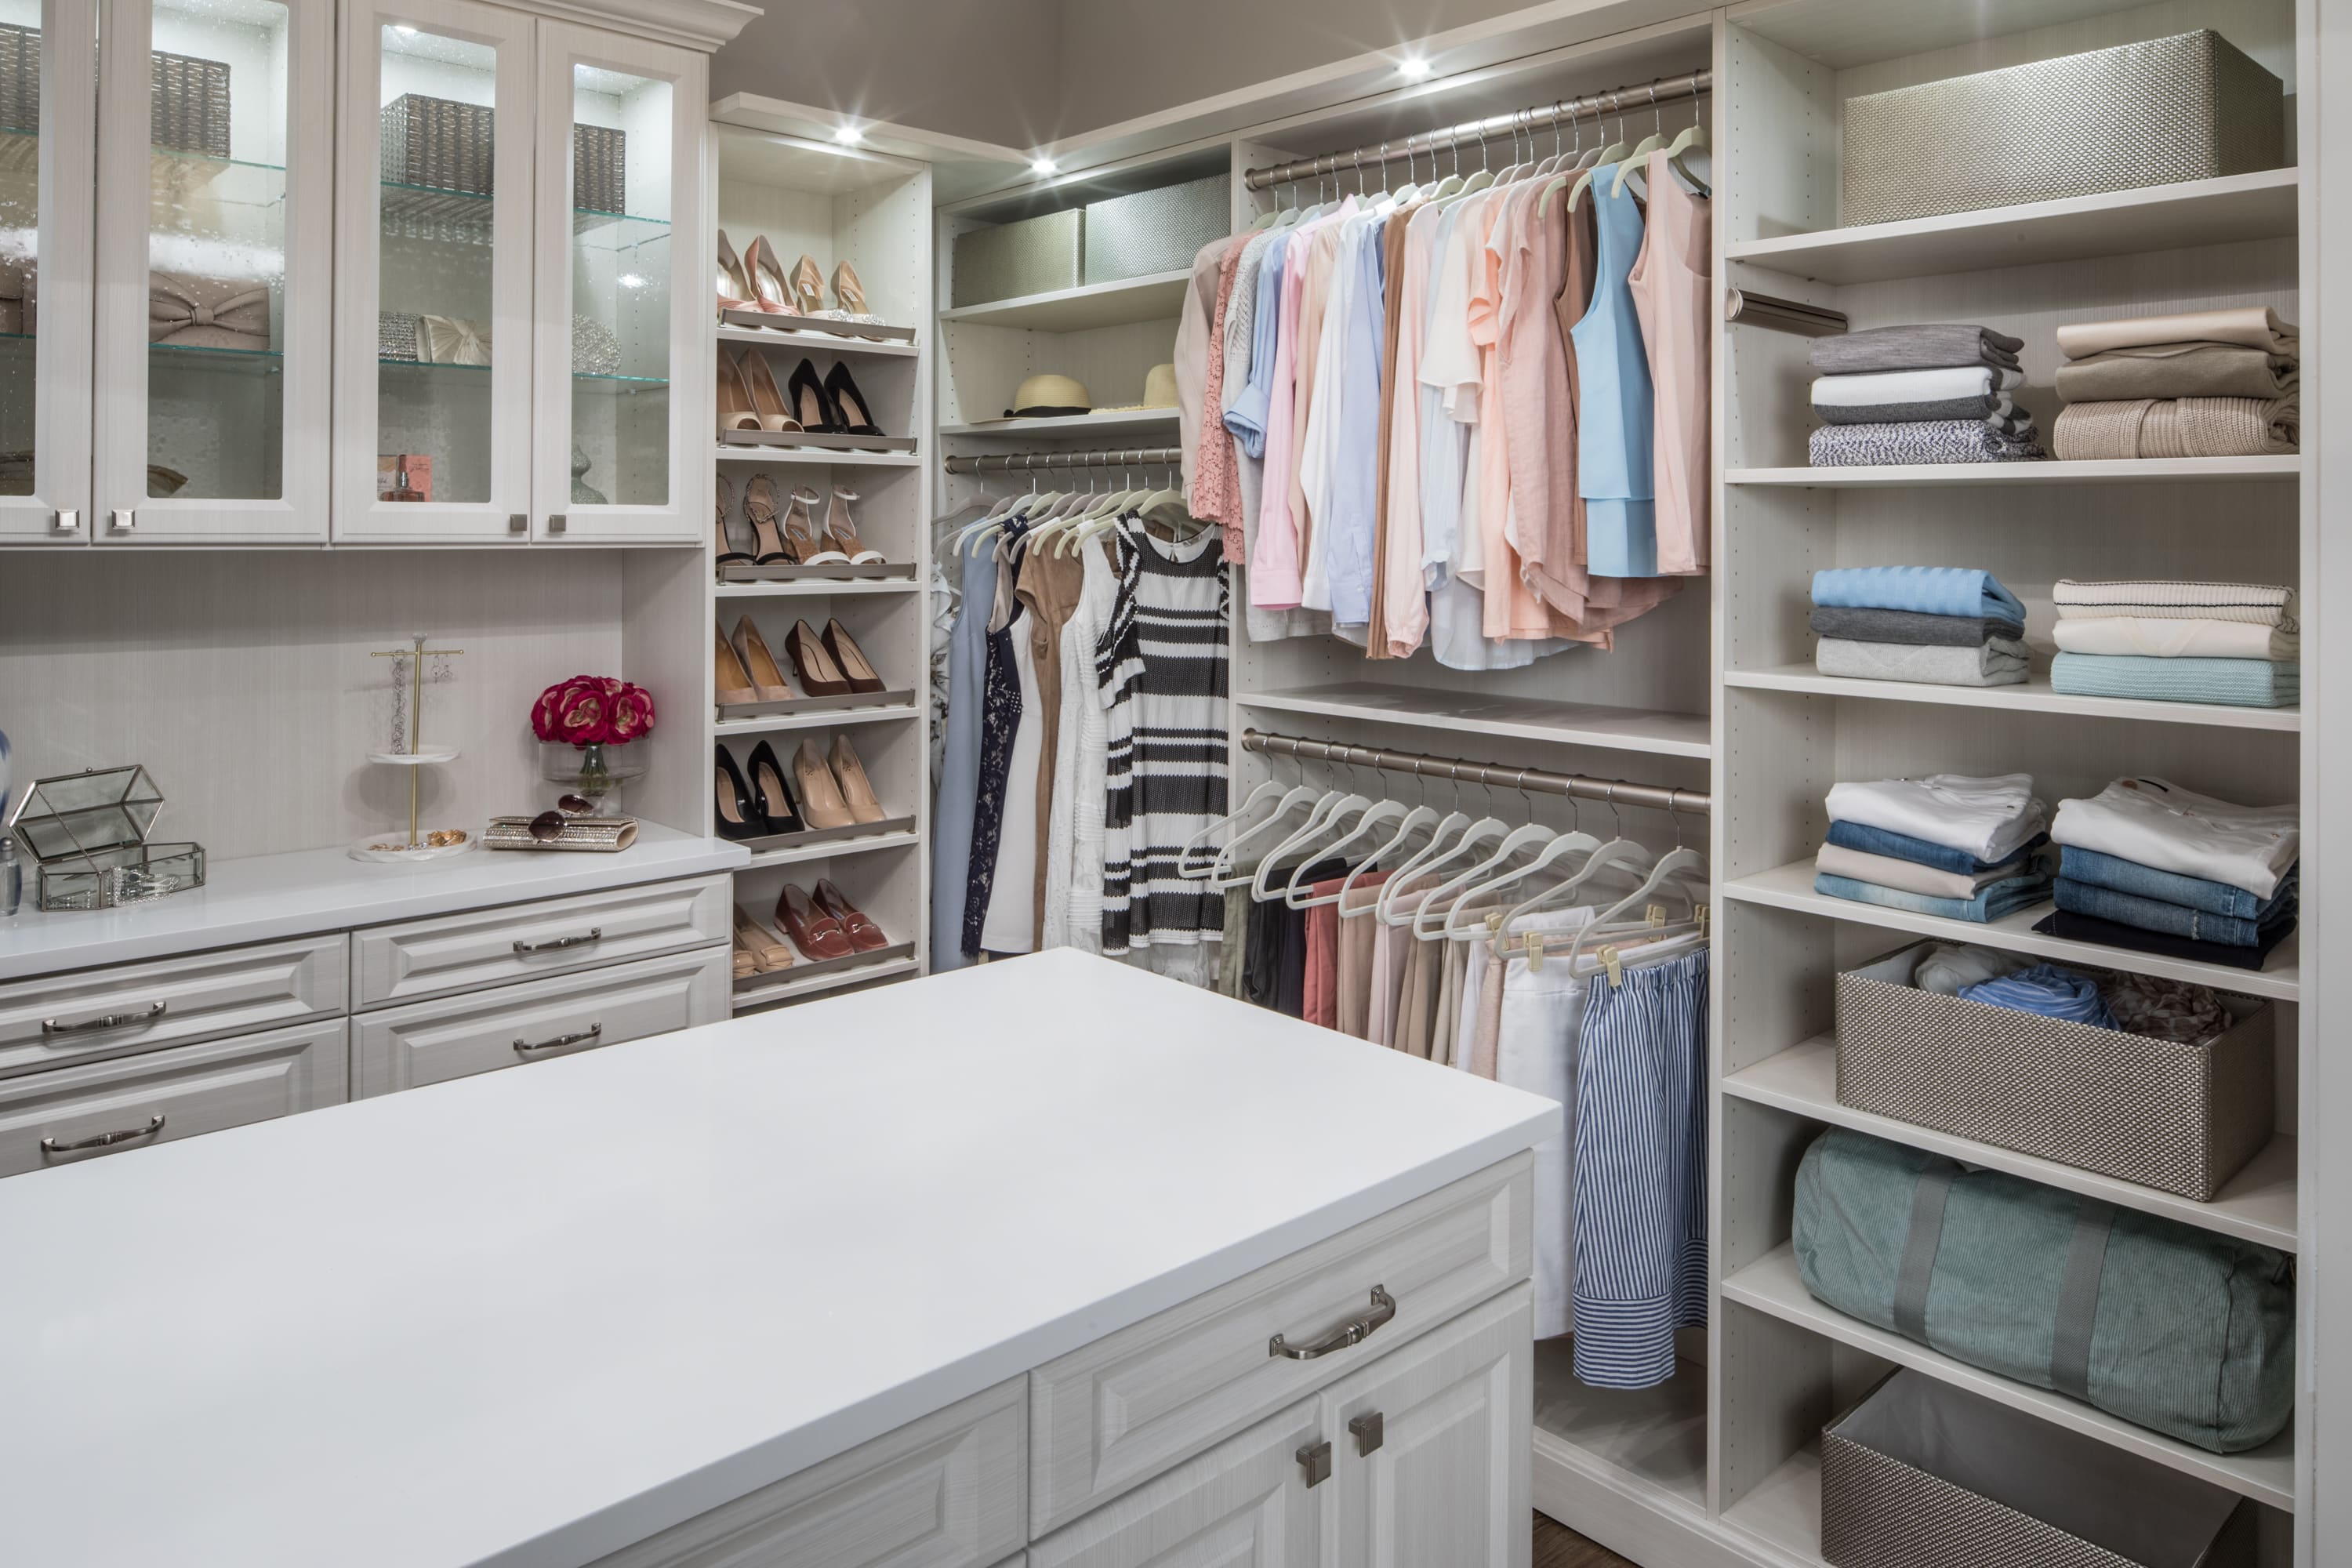 Boutique closet with clothing on shelves, in racks, and in drawers and cabinets